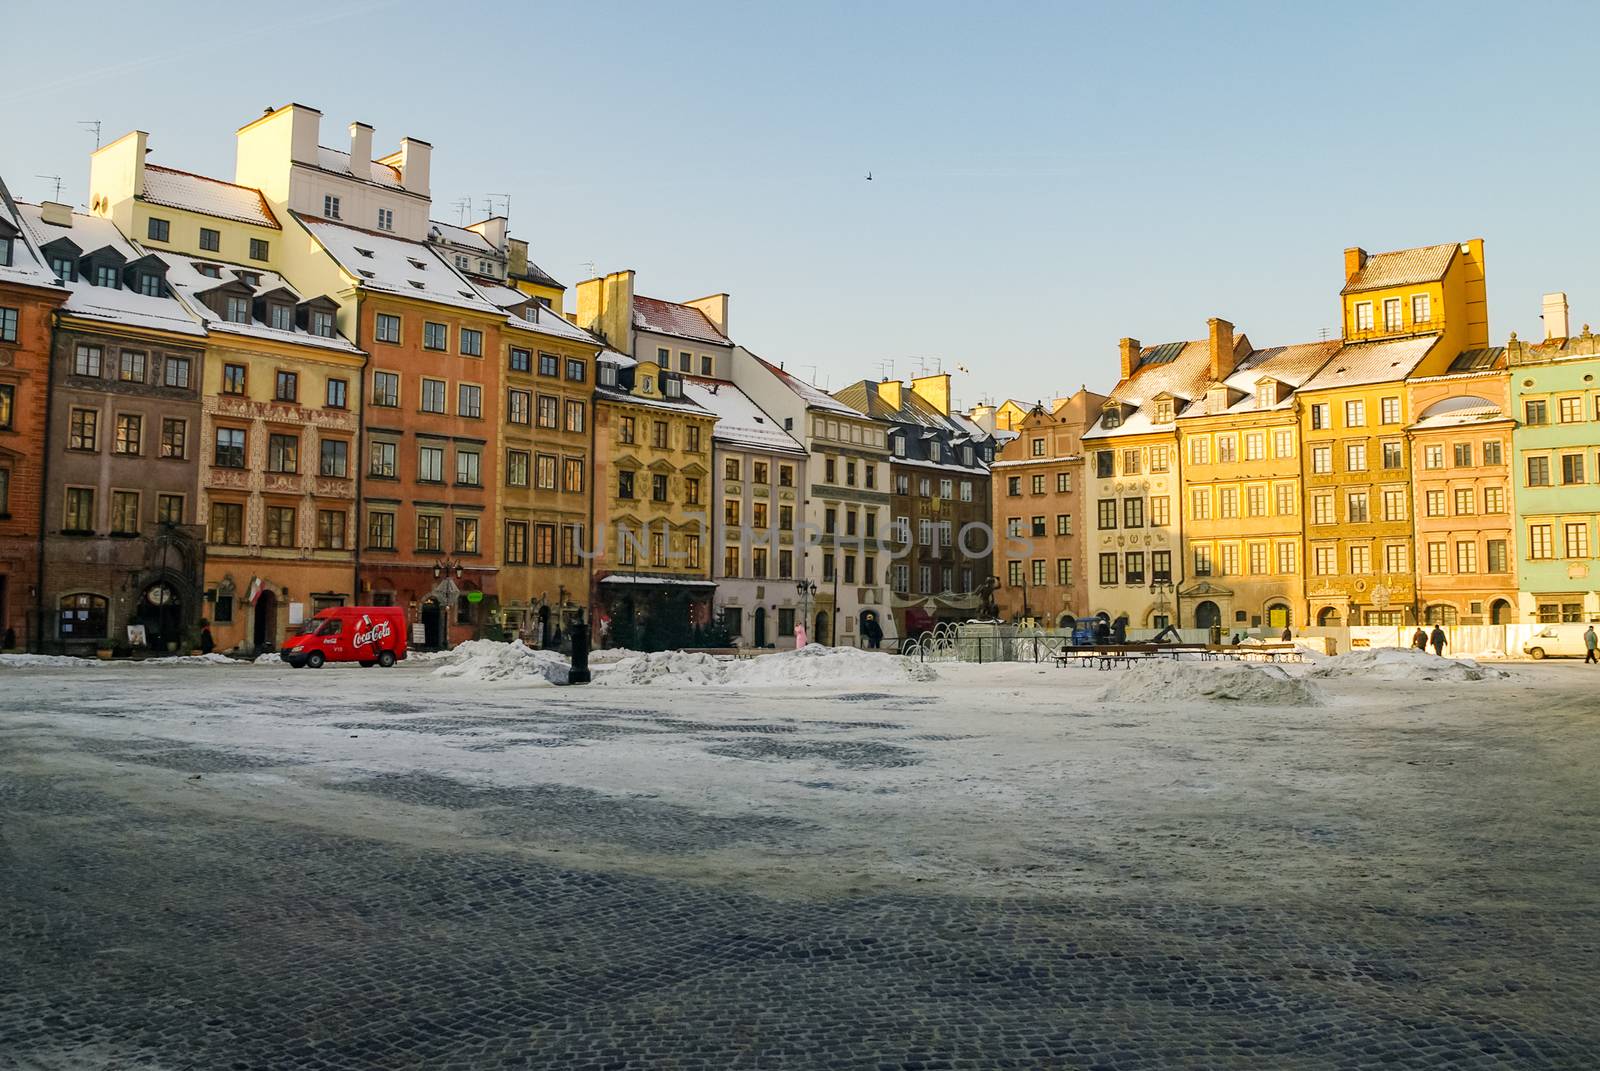 Warsaw, Poland -January 5, 2011: Houses in old town market square, Warsaw, Poland. Winter time with snow